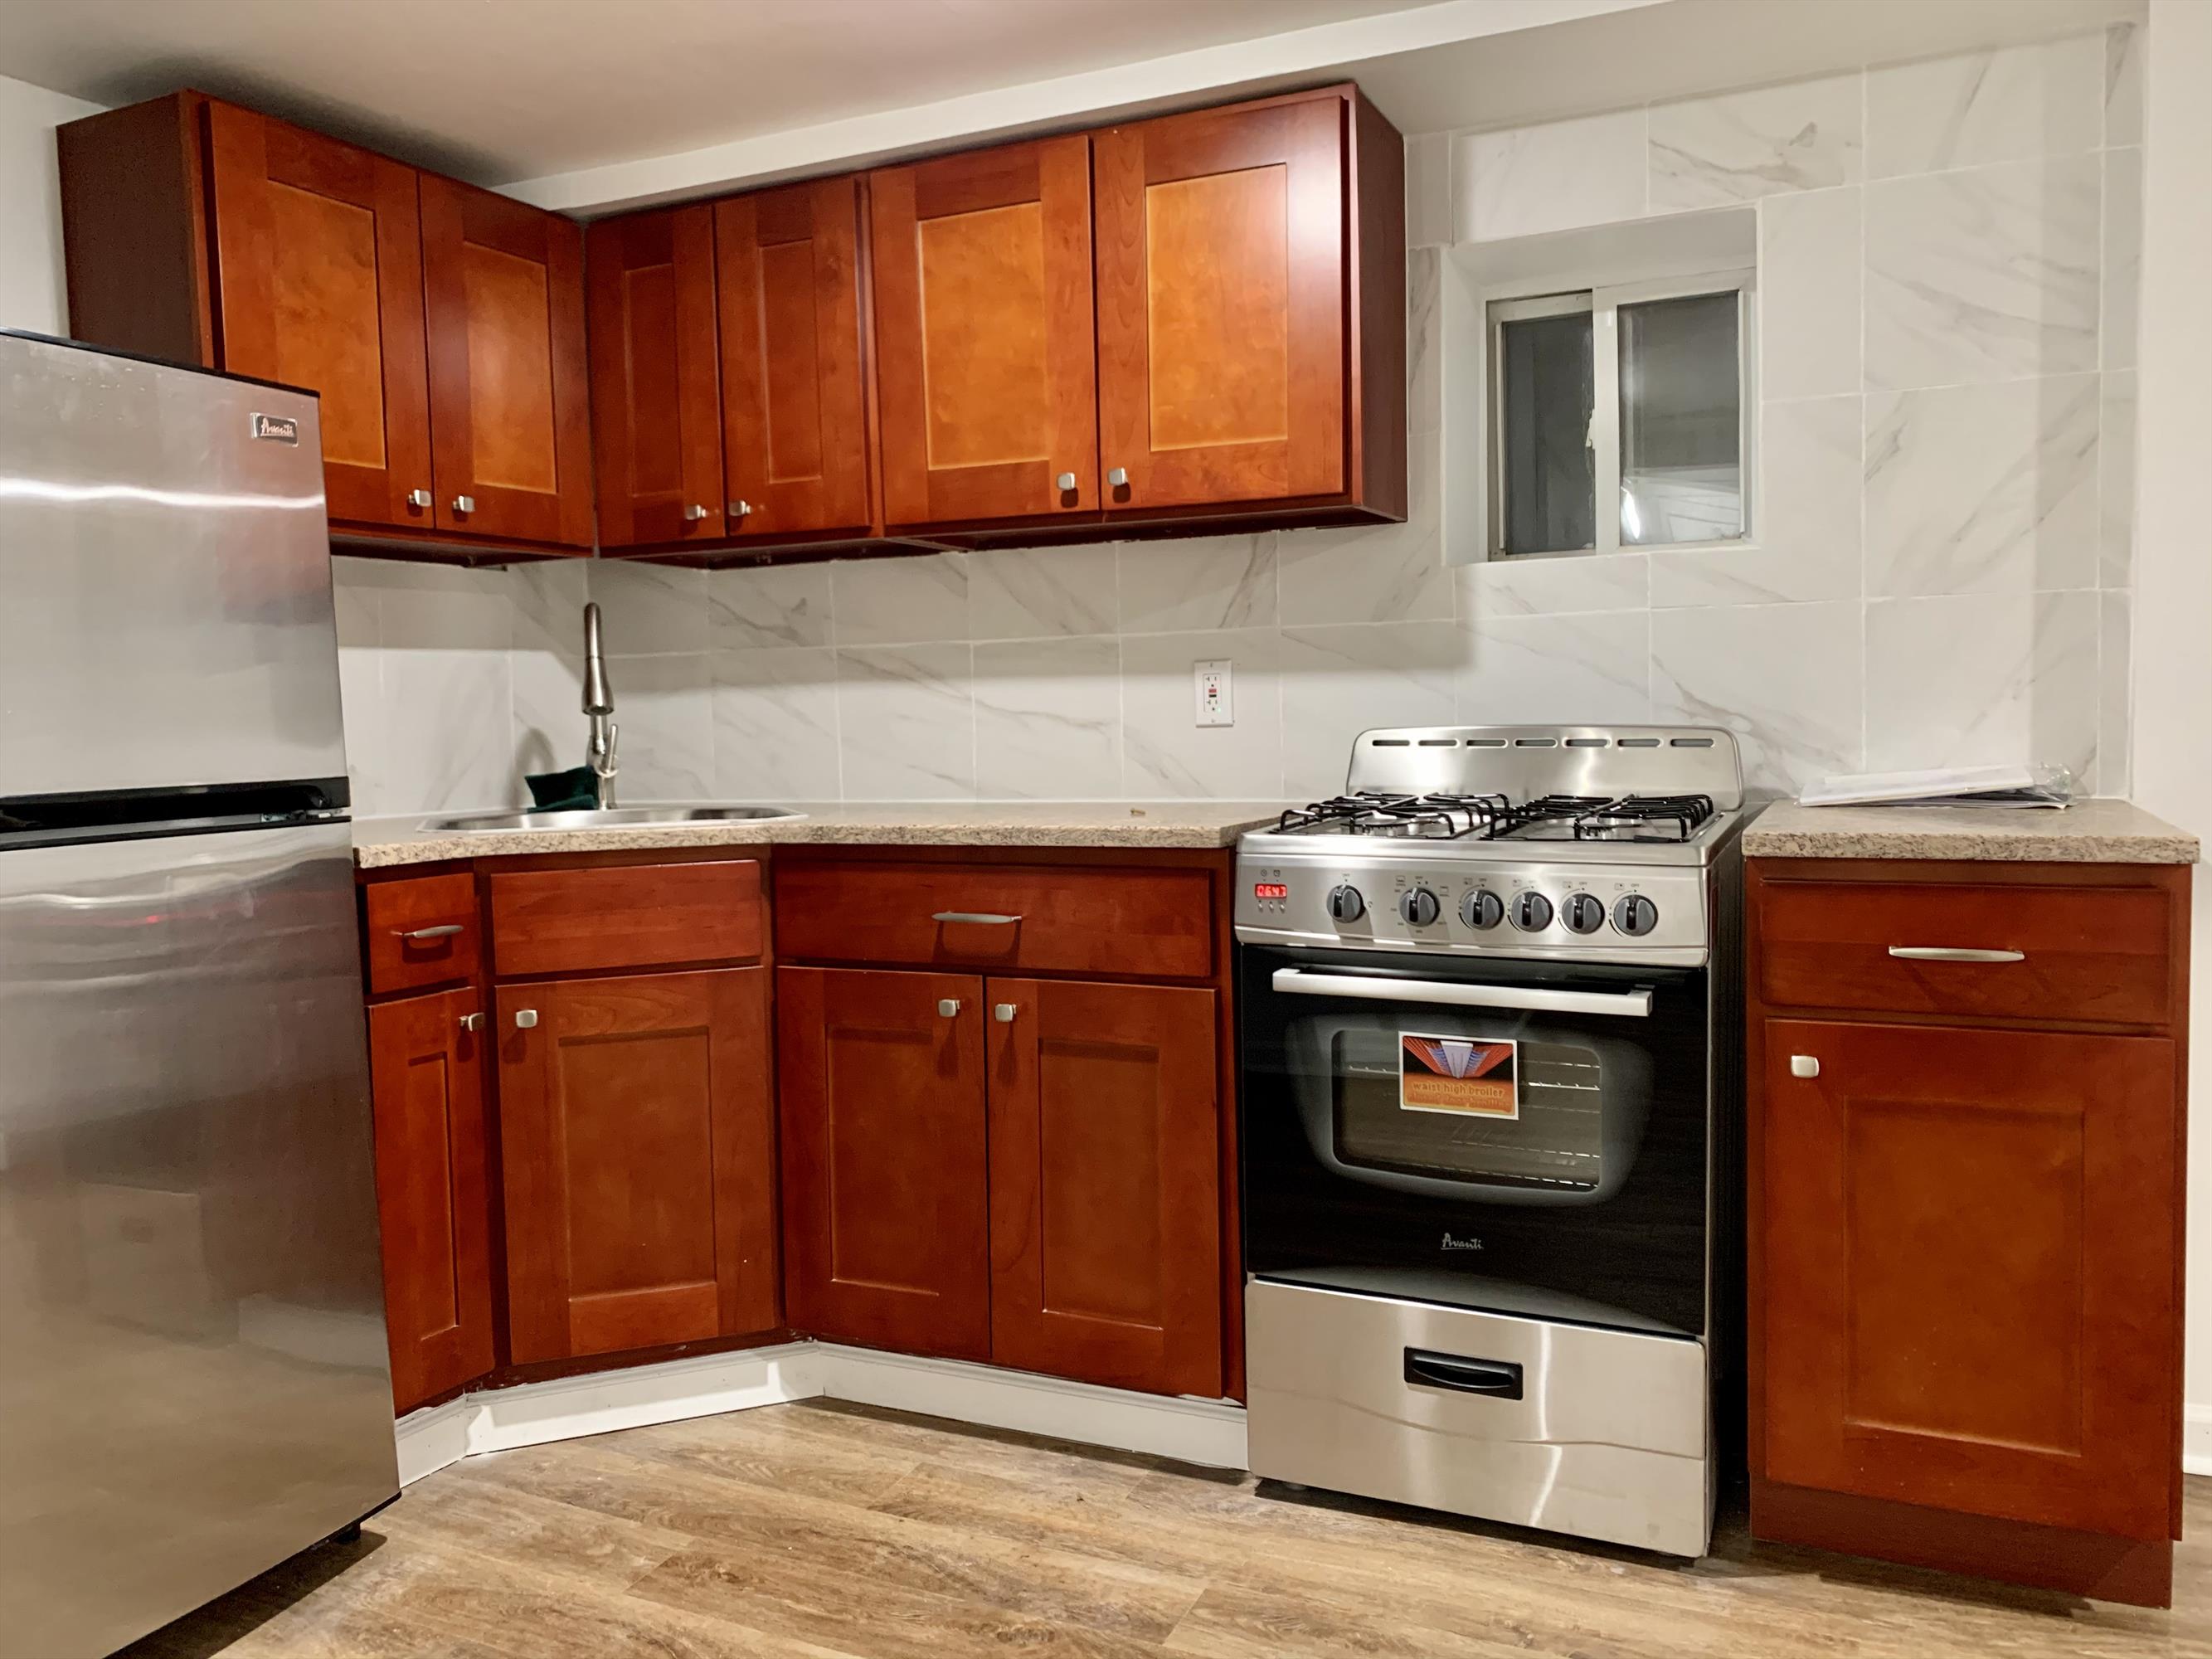 Beautiful and cozy 1 bed/1 bath basement apartment, featuring stainless steel appliances, wood cabinetry, granite countertop, totally updated. Steps to NYC Transportation. Won’t last must see!

Juan "Ralph" Rodriguez
Broker/Associate
LIBERTY REALTY LLC
